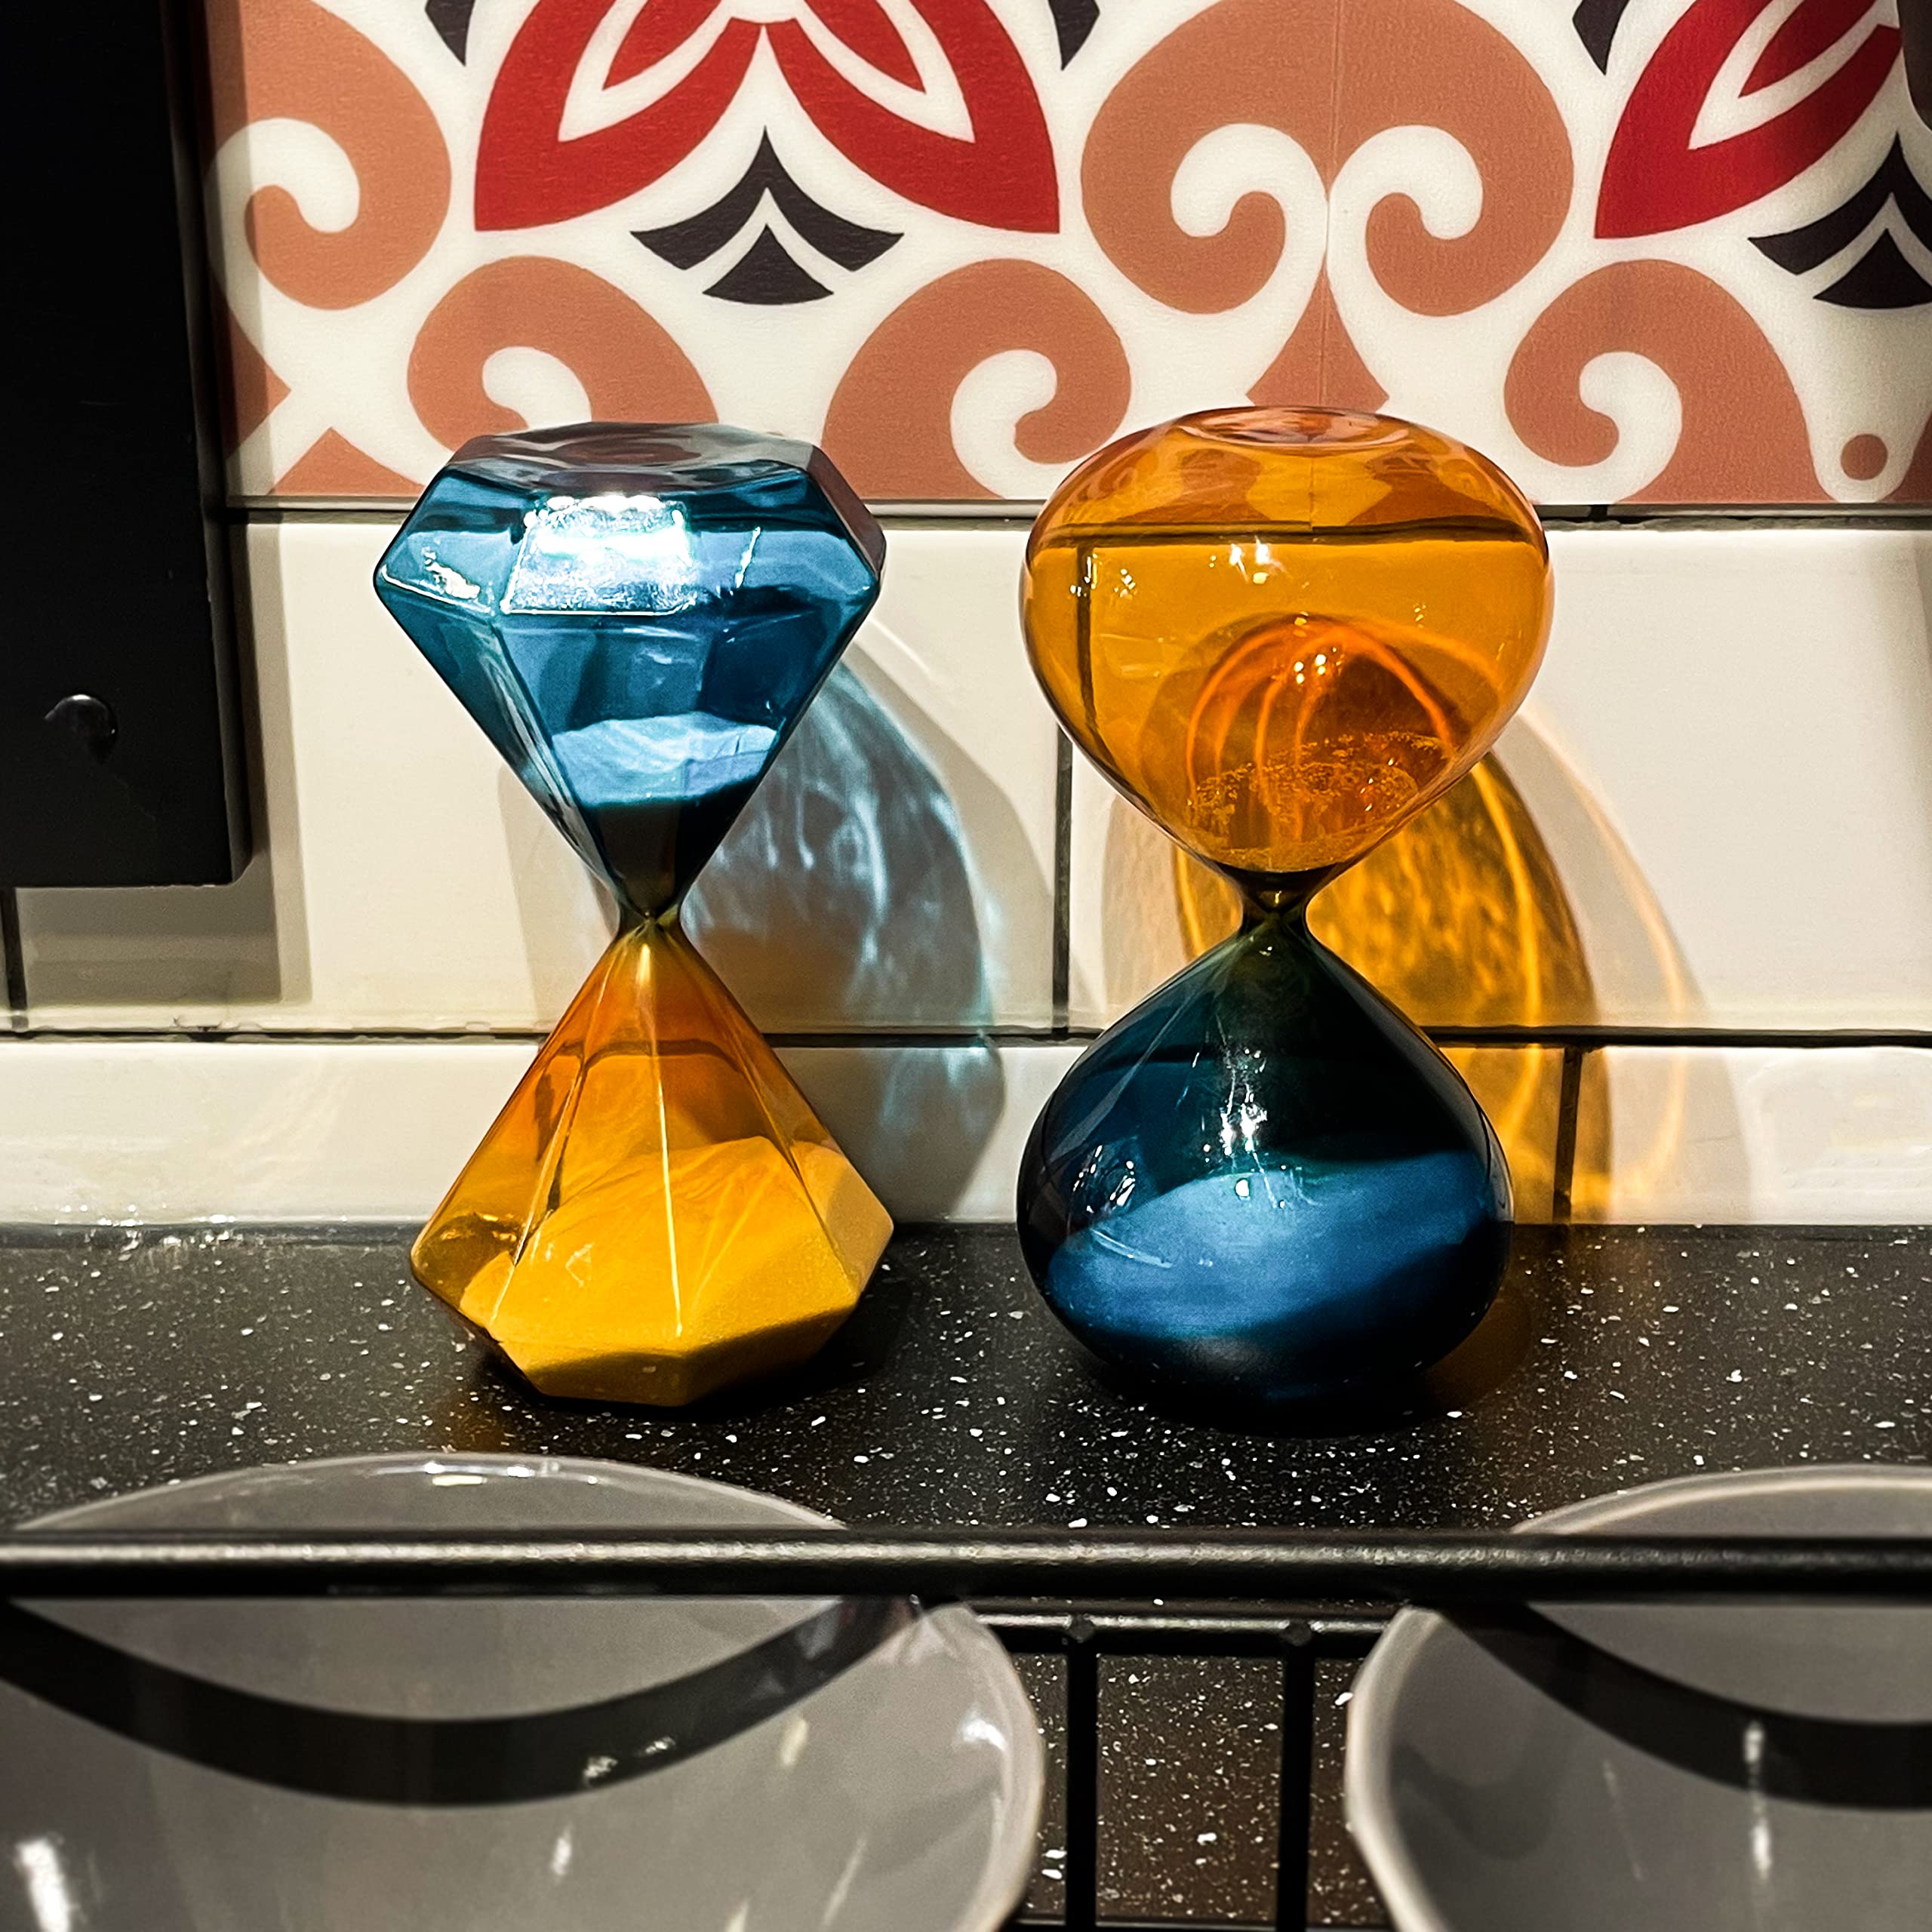 Hourglass Sand Timer Hour Glasses with Sand 30 Minutes & 15 Minute Hourglass Blue Timer Sand Clock Set of 2, Orange Hour Glasses Decorative Sand Watch for Yoga,Study Timer,Game,Desk,Office,Kitchen